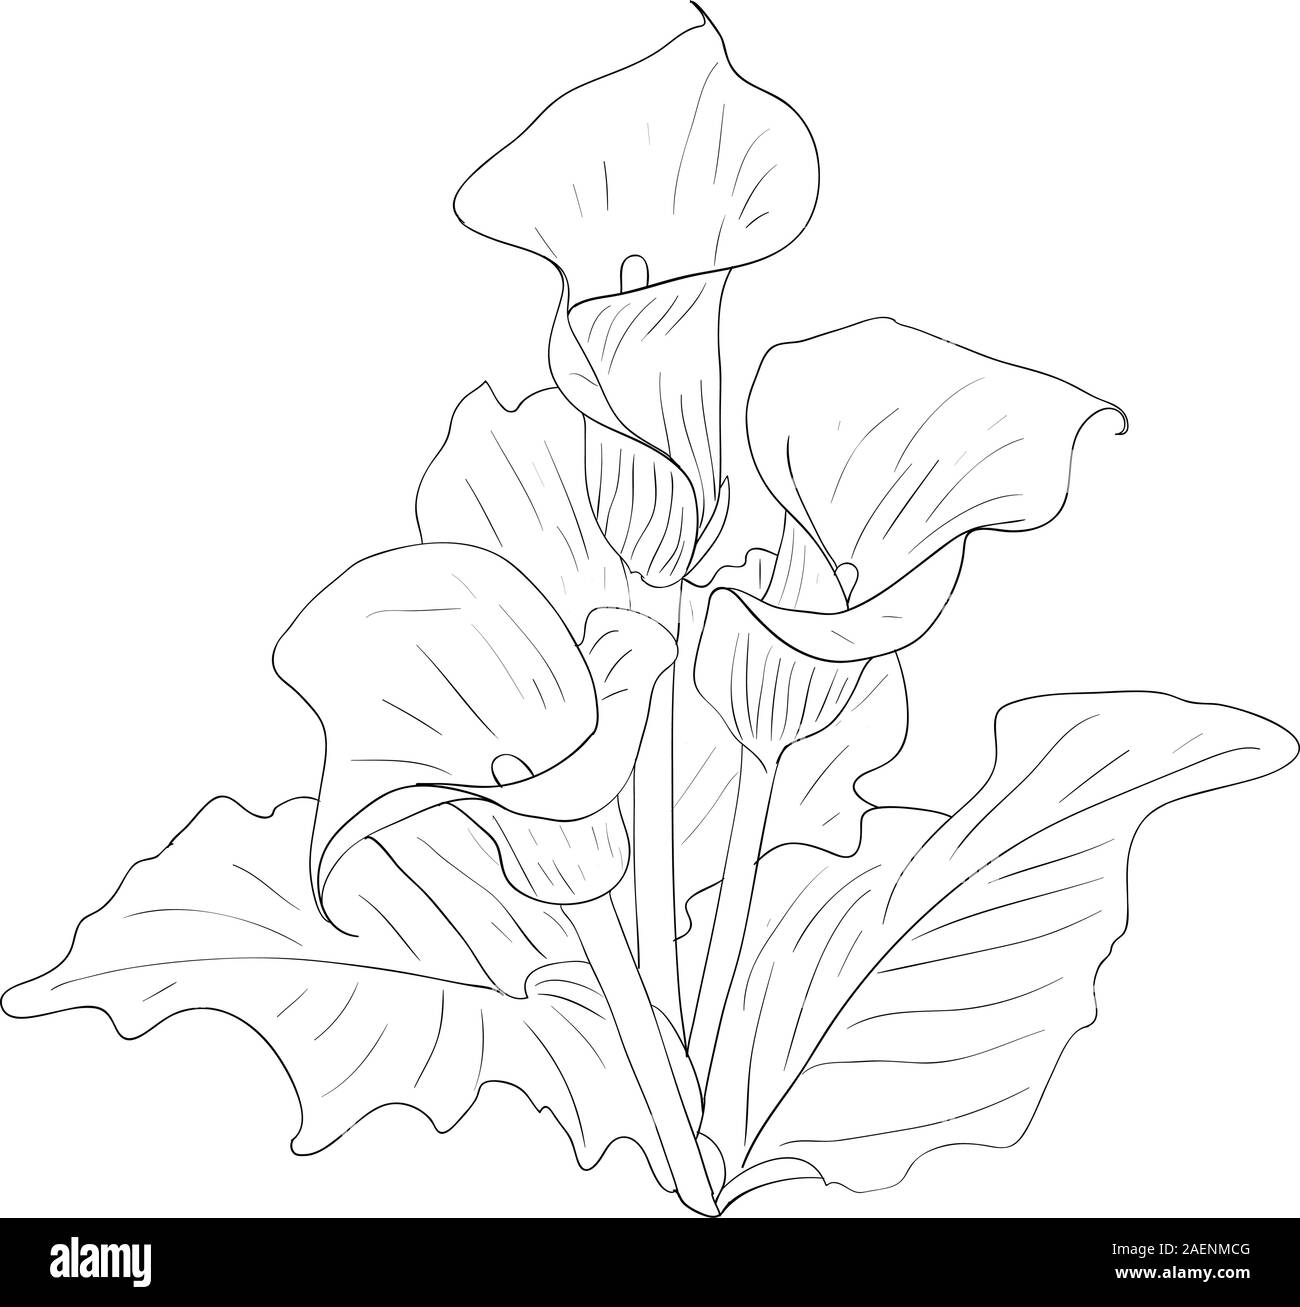 Beautiful flowers calla lilies on a white background drawn by hand ...